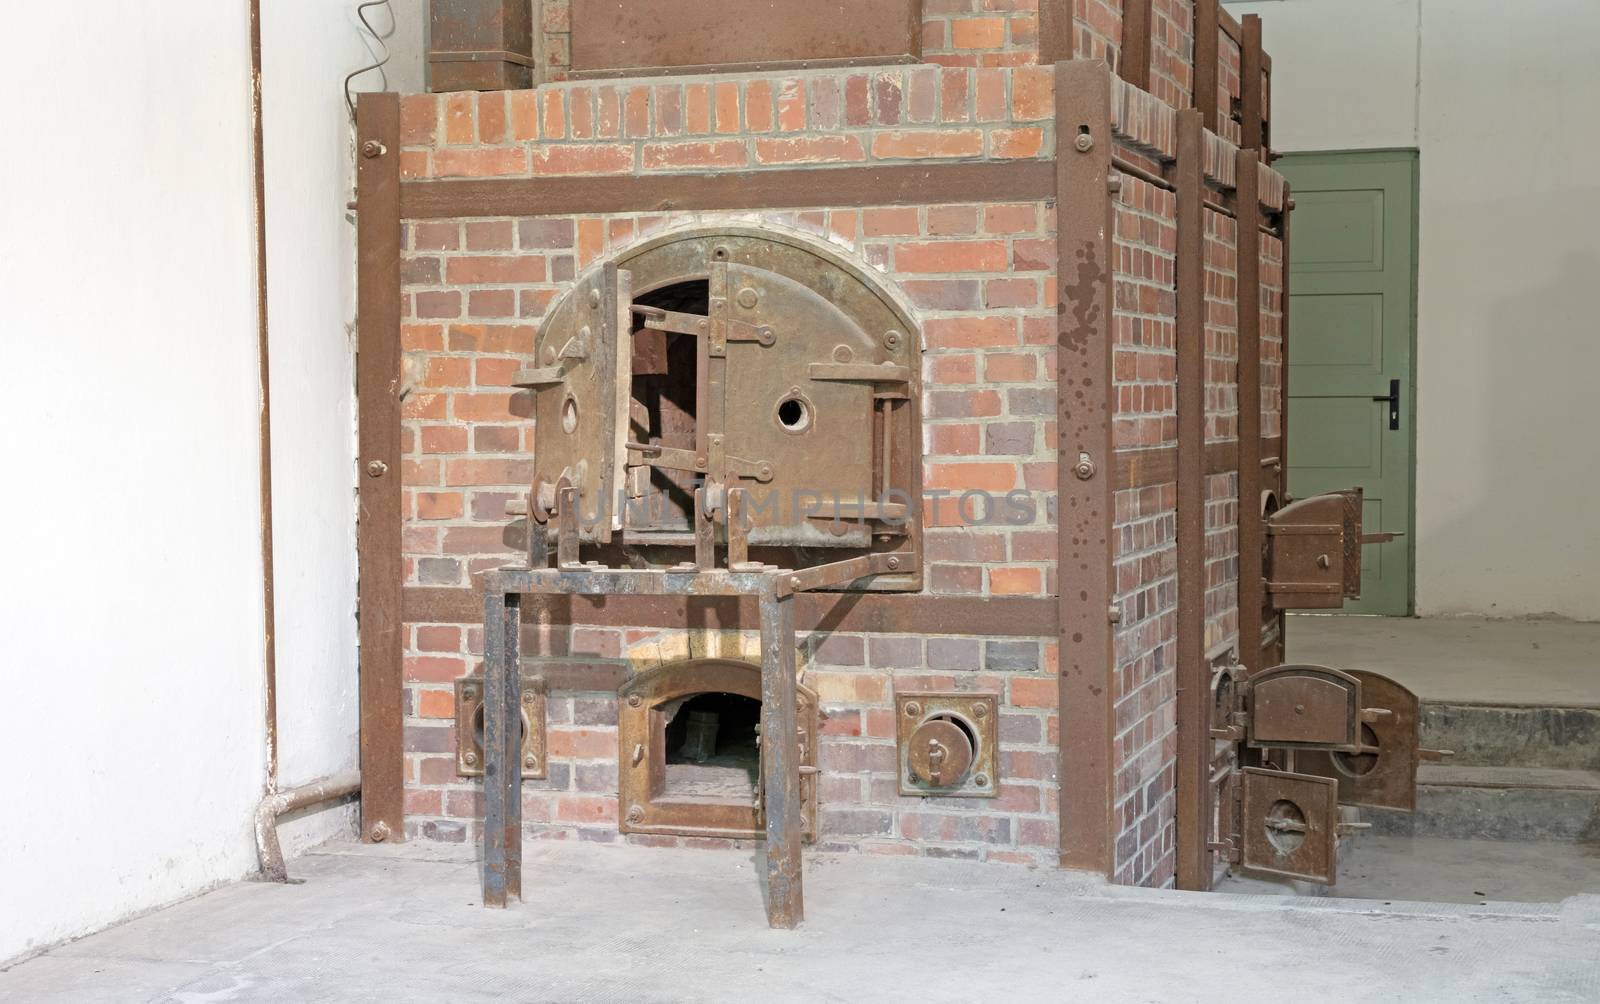 Dachau, Germany on july 13, 2020: Oven in the crematorium at the by michaklootwijk